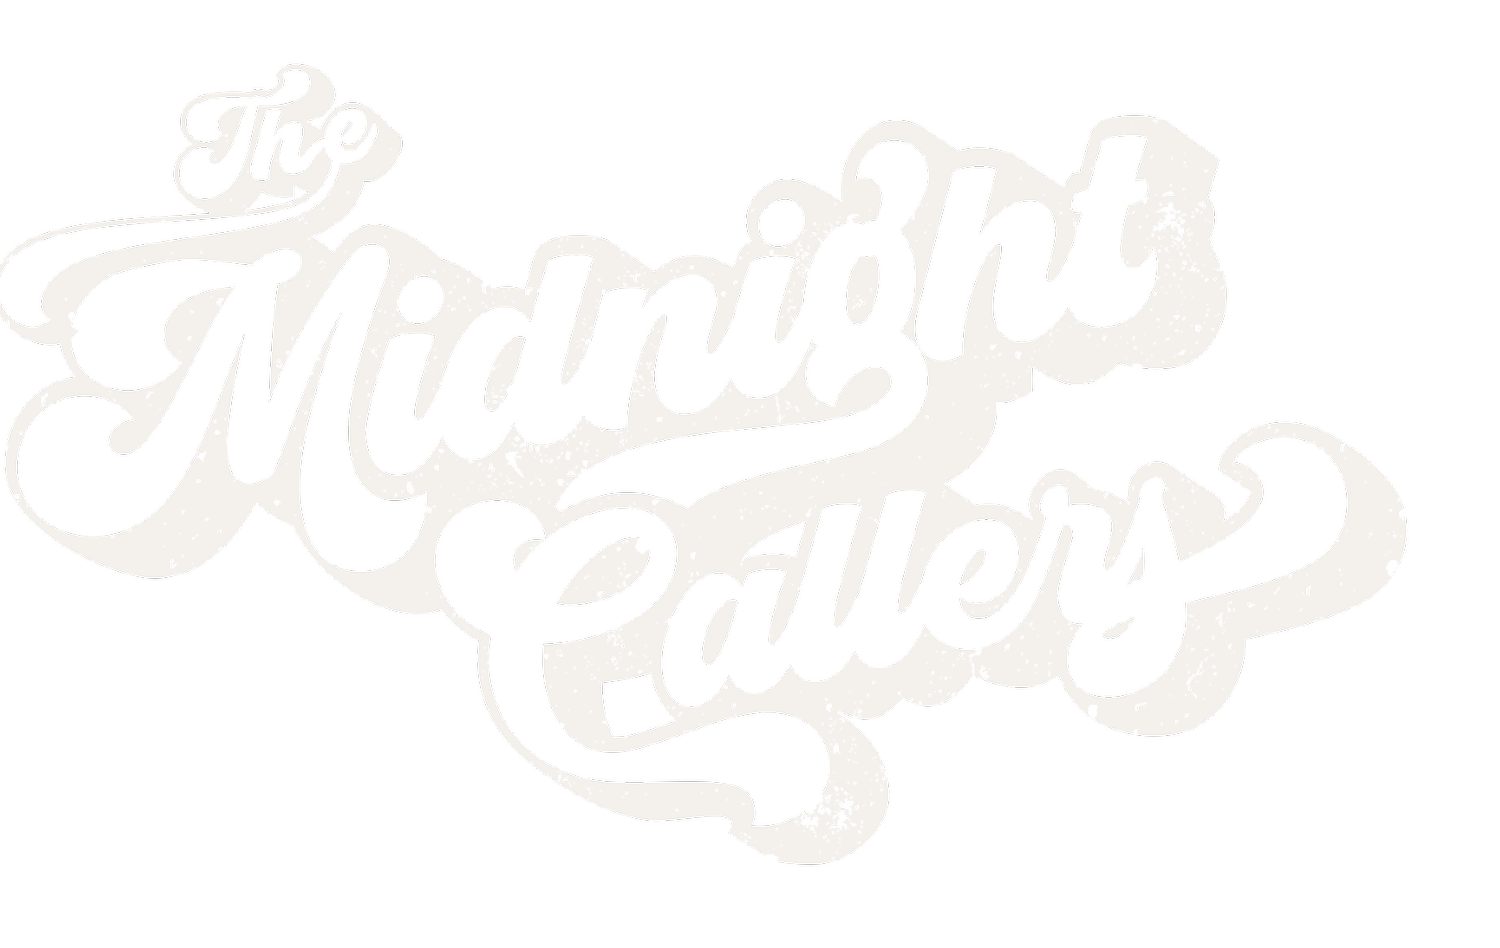 The Midnight Callers